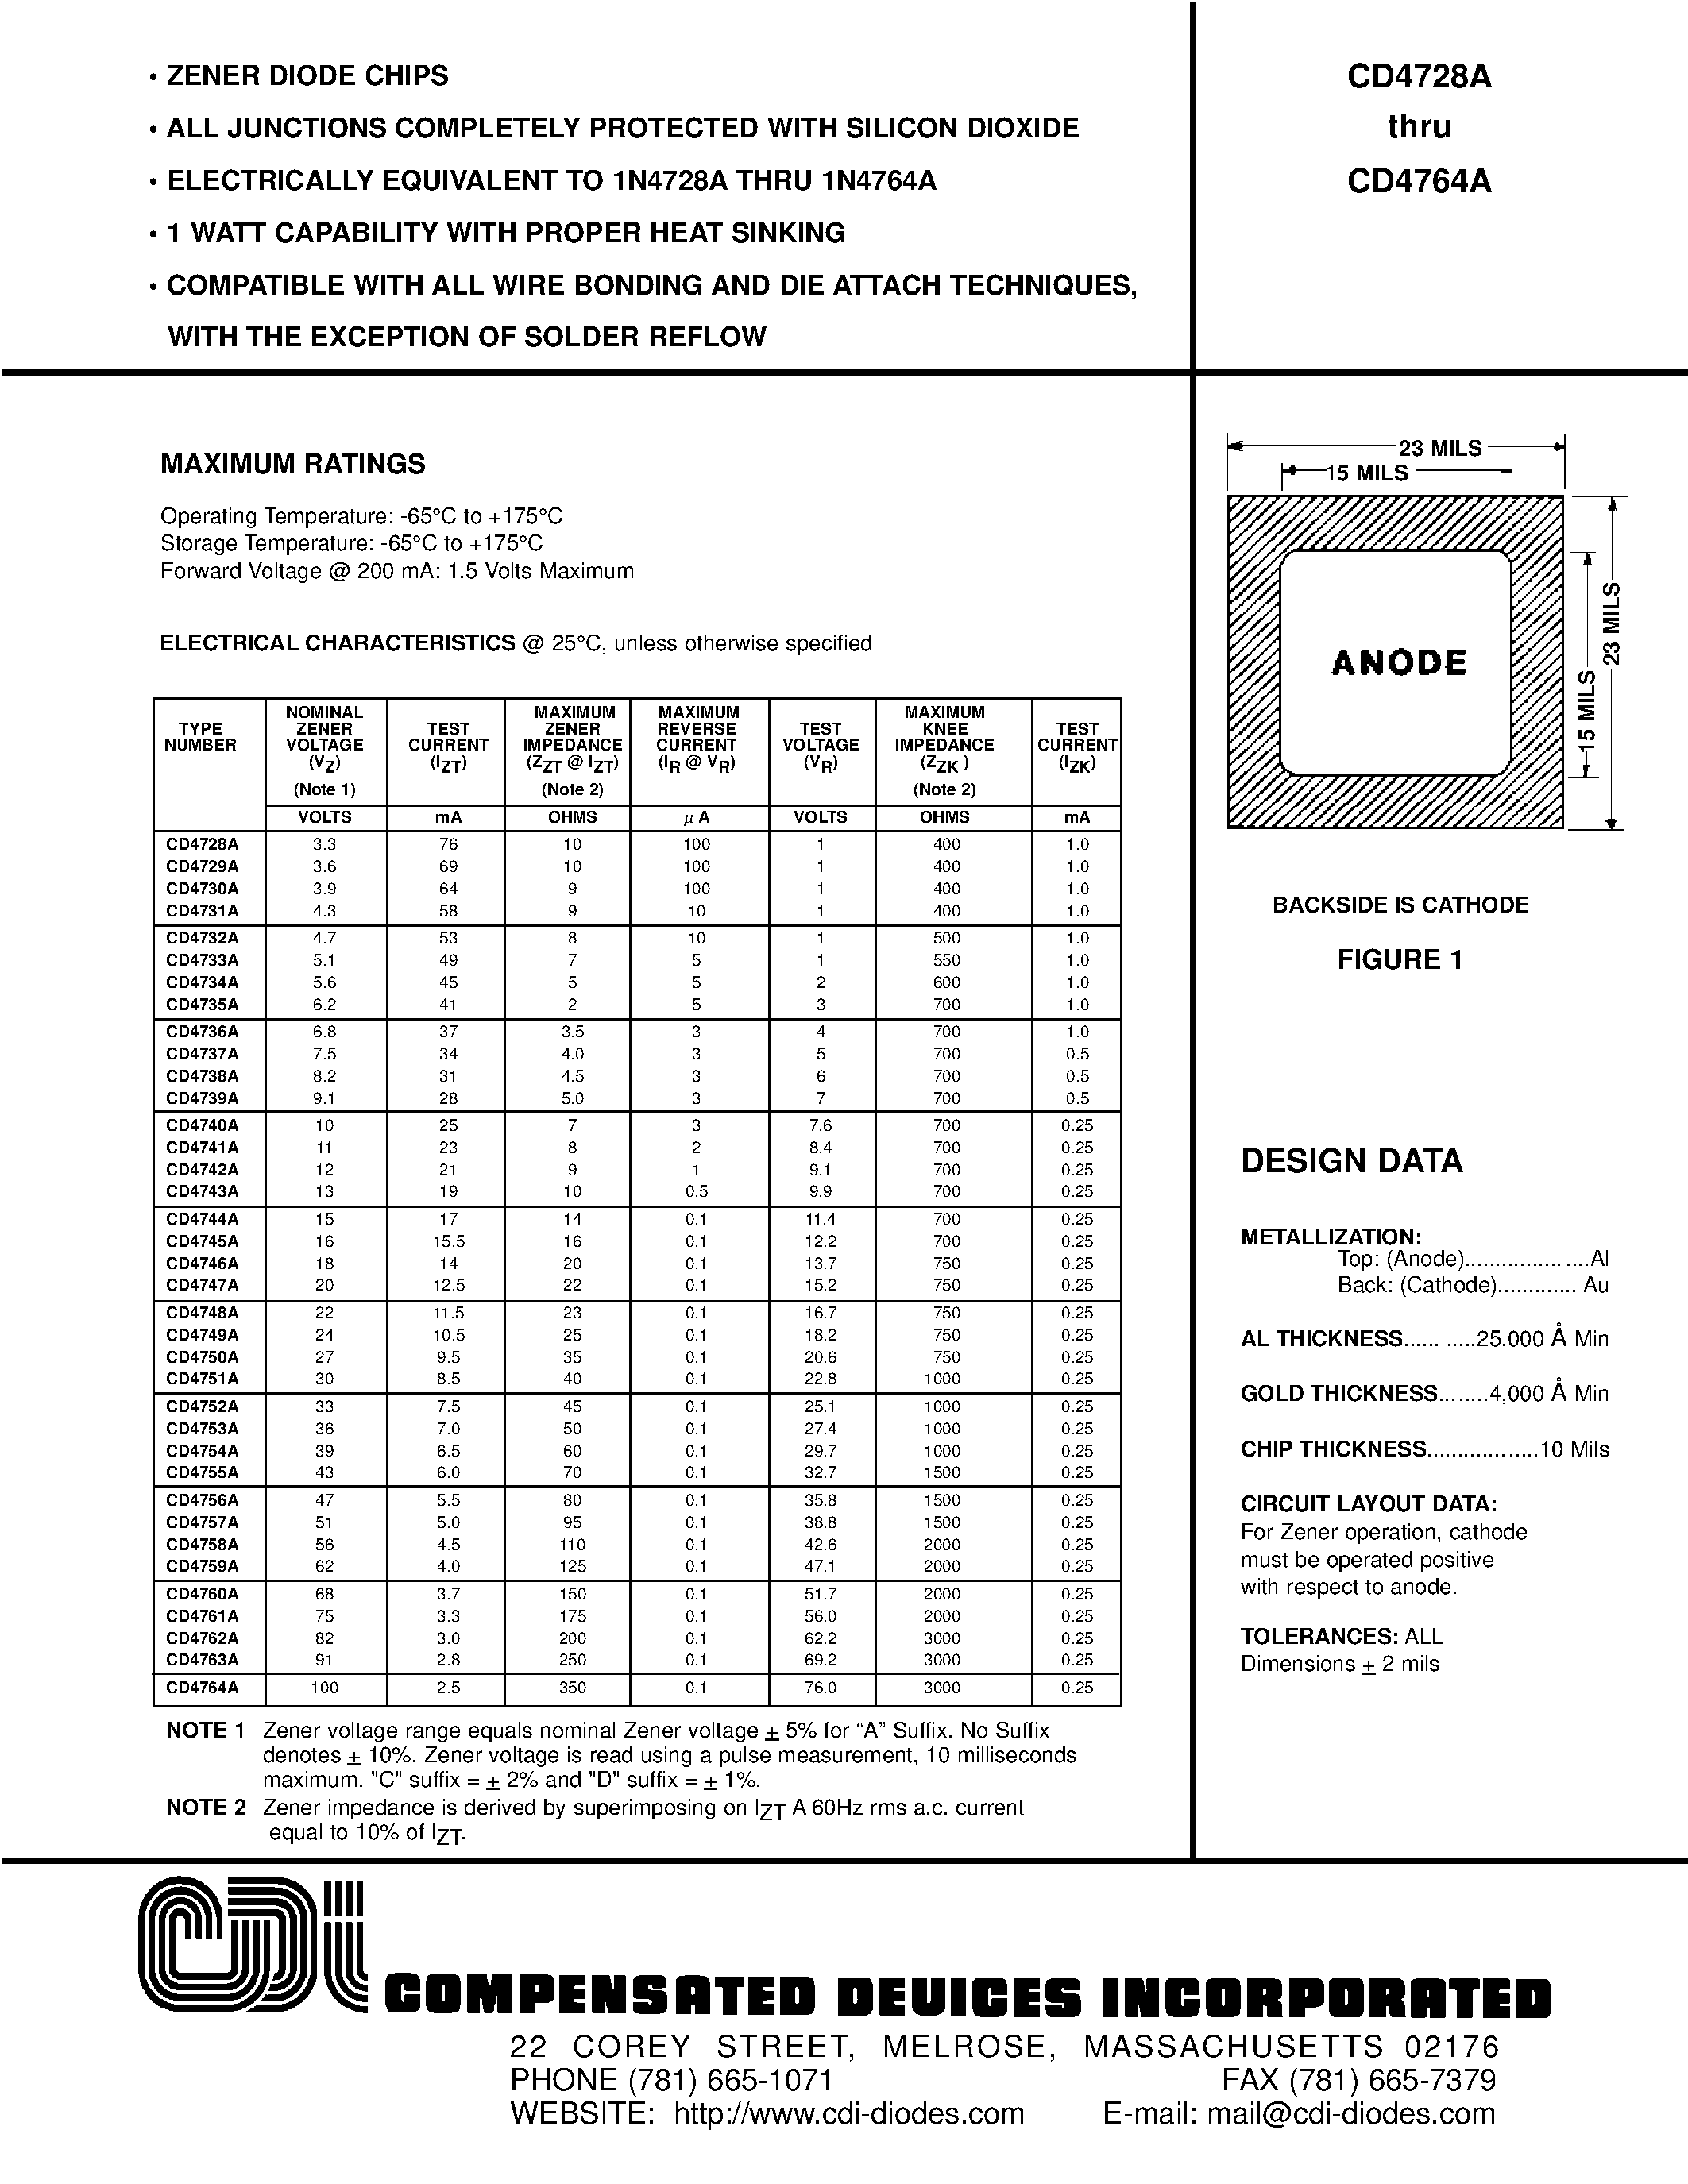 Datasheet CD4749A - ZENER DIODE CHIPS page 1